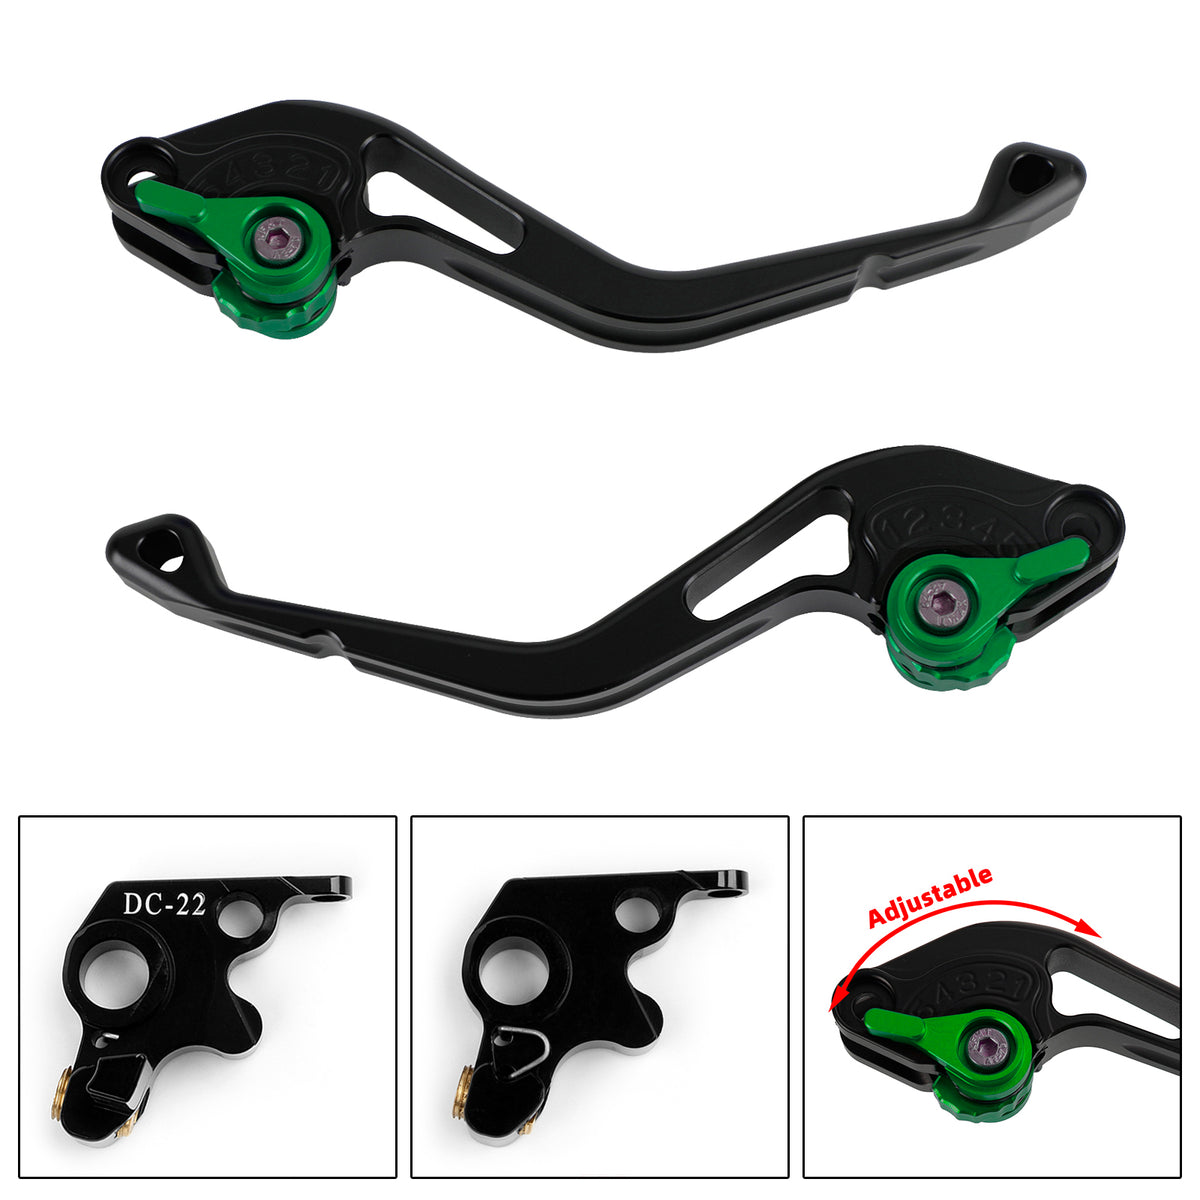 NEW Short Clutch Brake Lever fit for Ducati 748 916 MONSTER M400 M600 M750